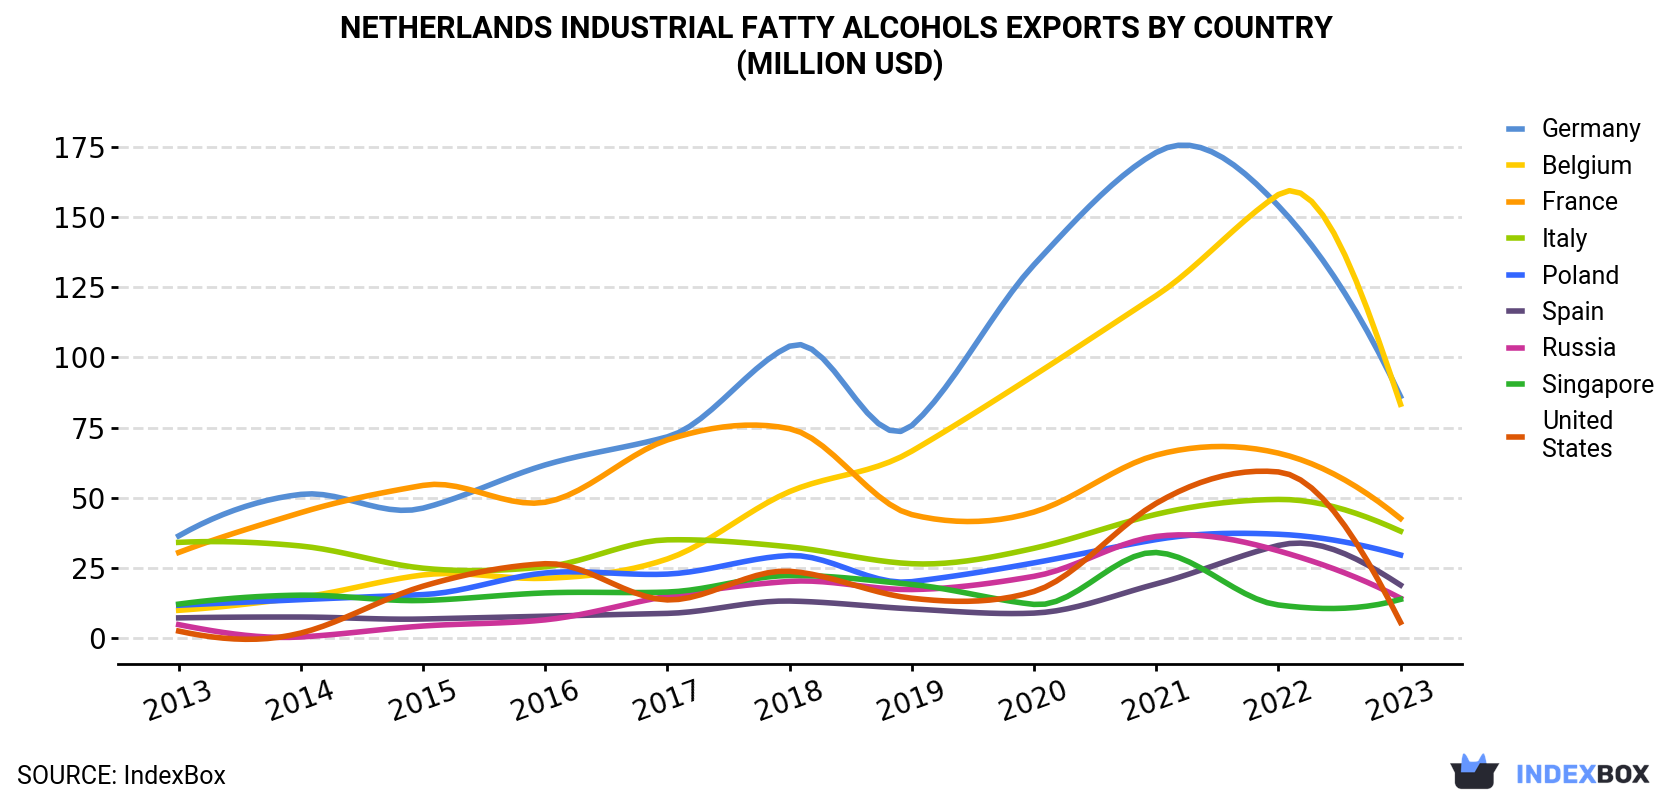 Netherlands Industrial Fatty Alcohols Exports By Country (Million USD)